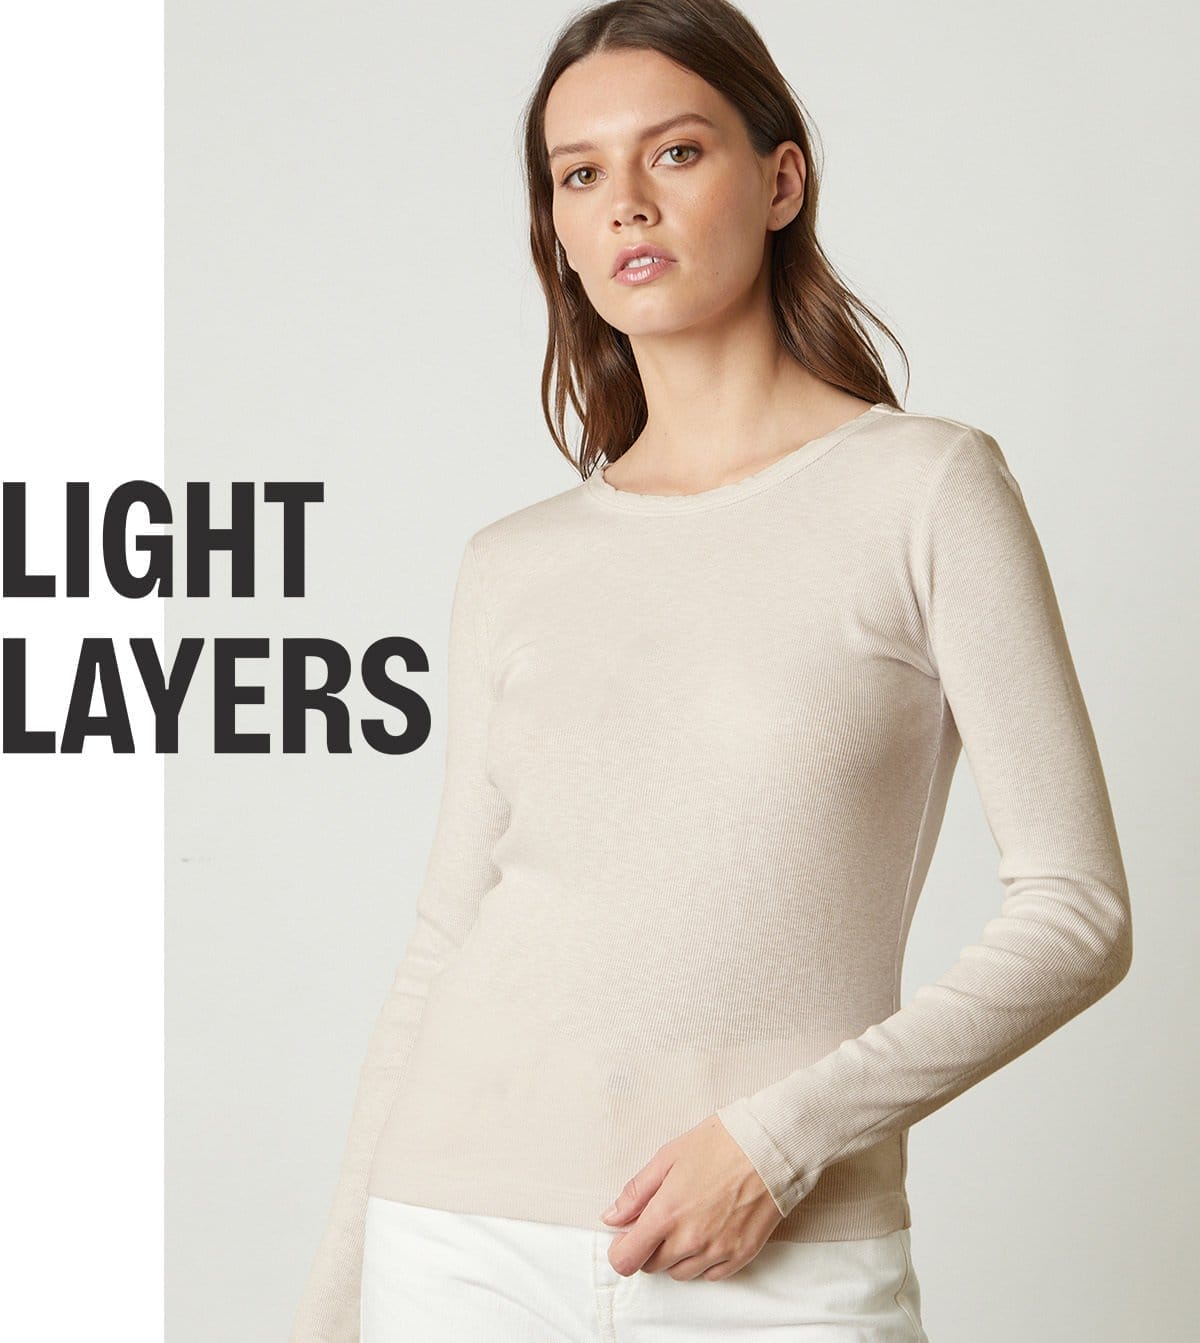 LIGHT LAYERS. TEES & TOPS